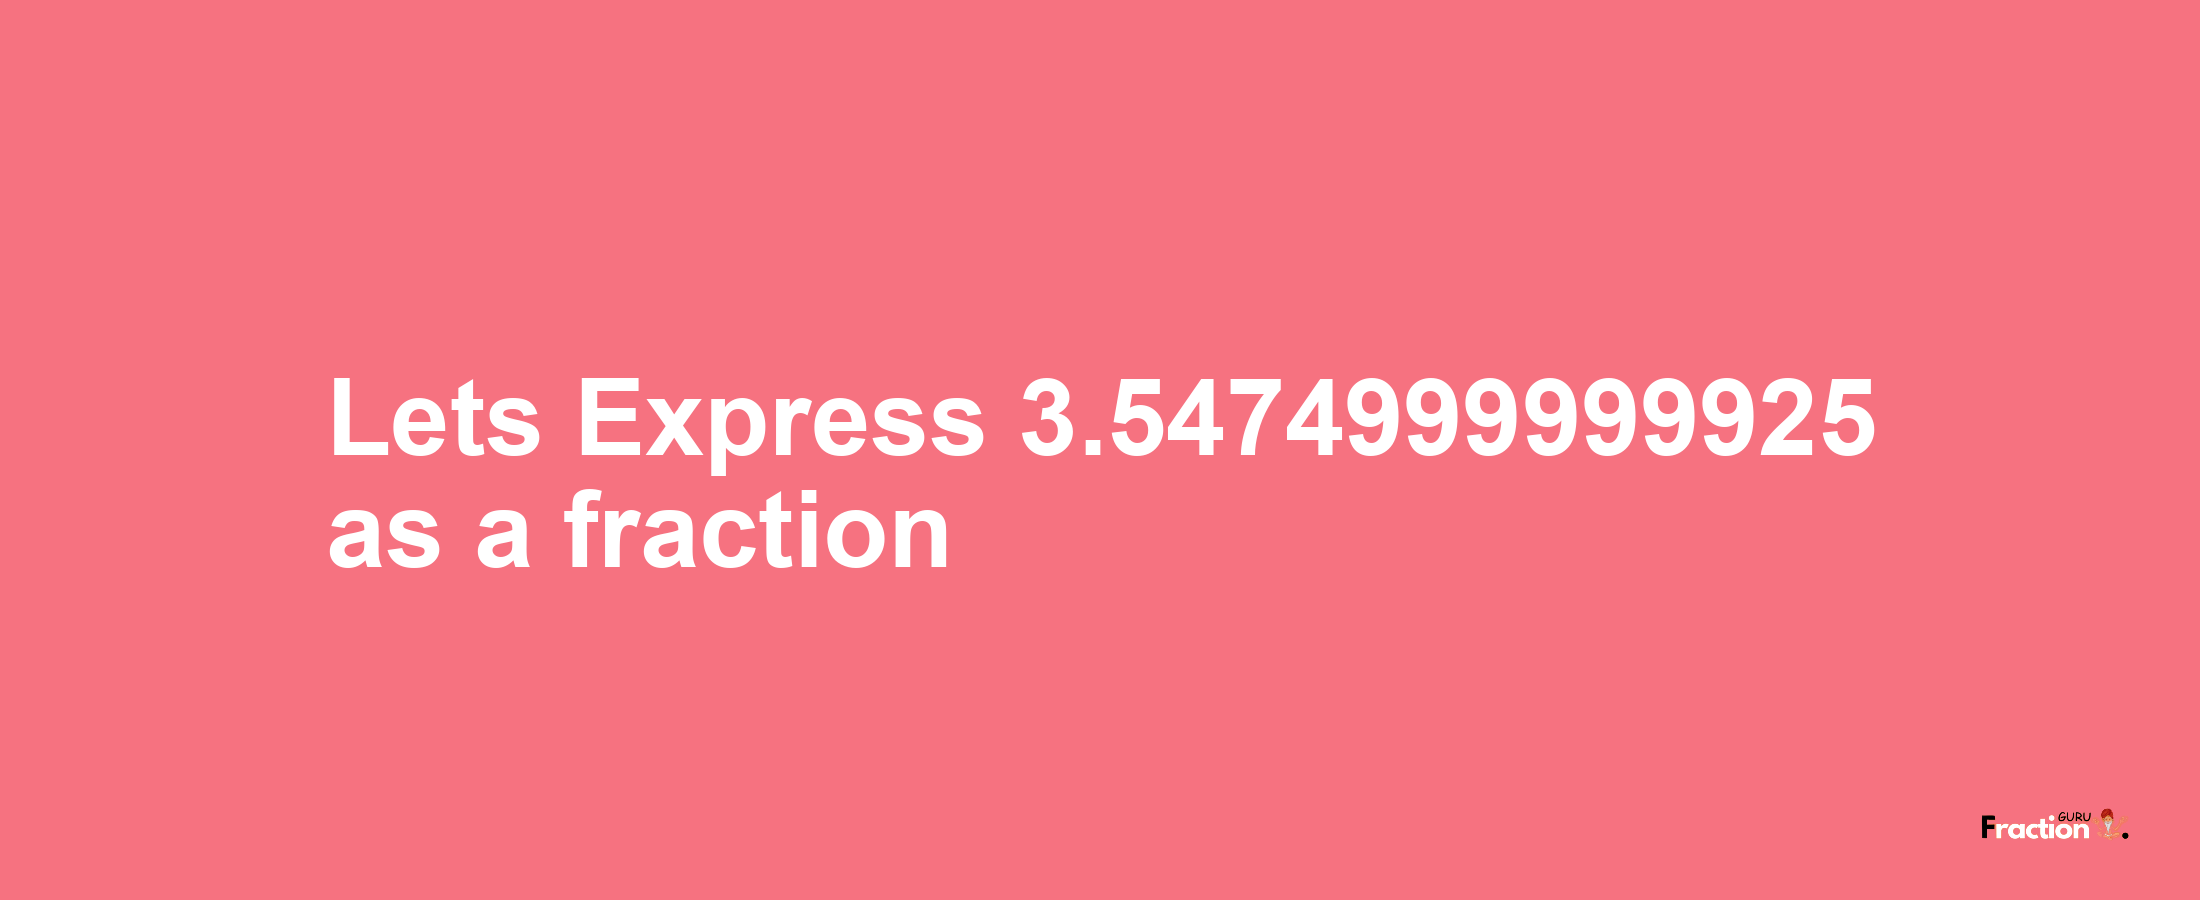 Lets Express 3.5474999999925 as afraction